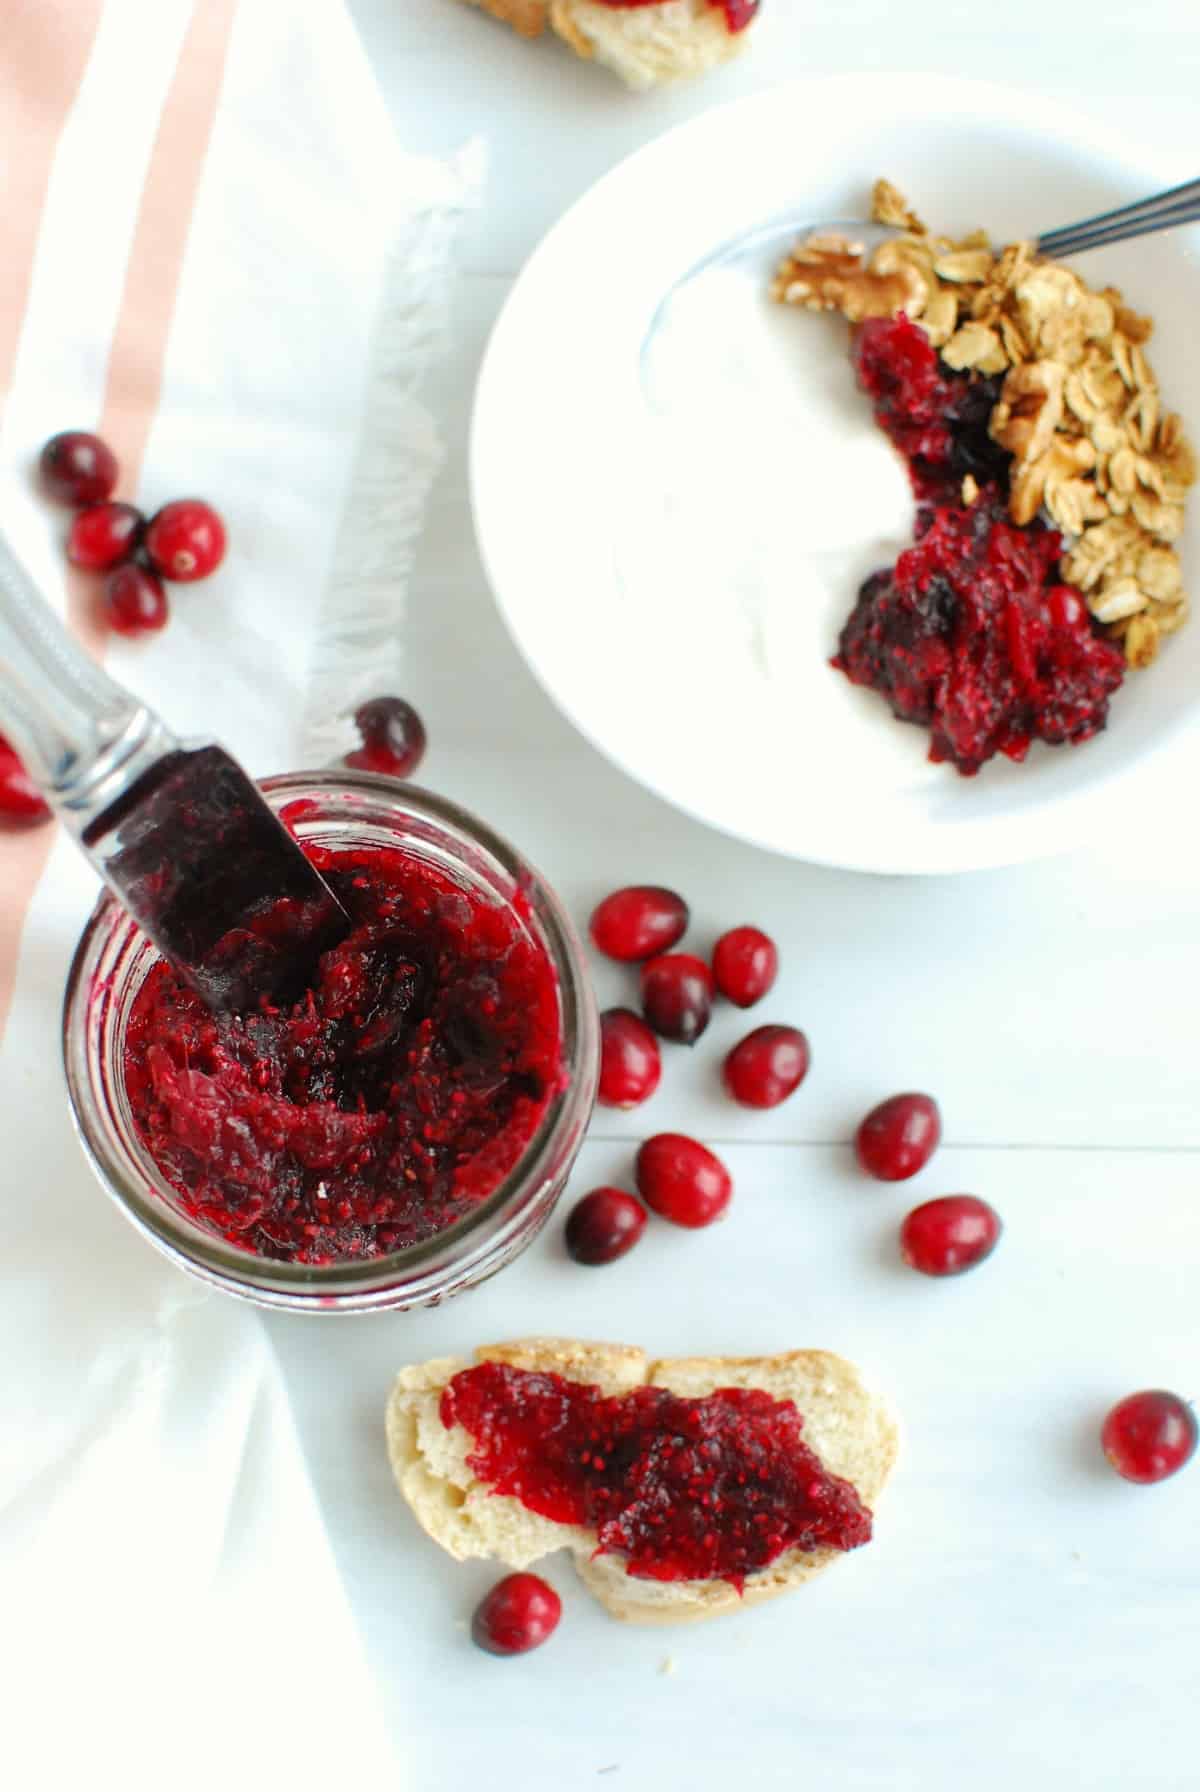 A jar of cranberry chia jam next to bread with the jam spread on it and a bowl of yogurt with the jam mixed in.